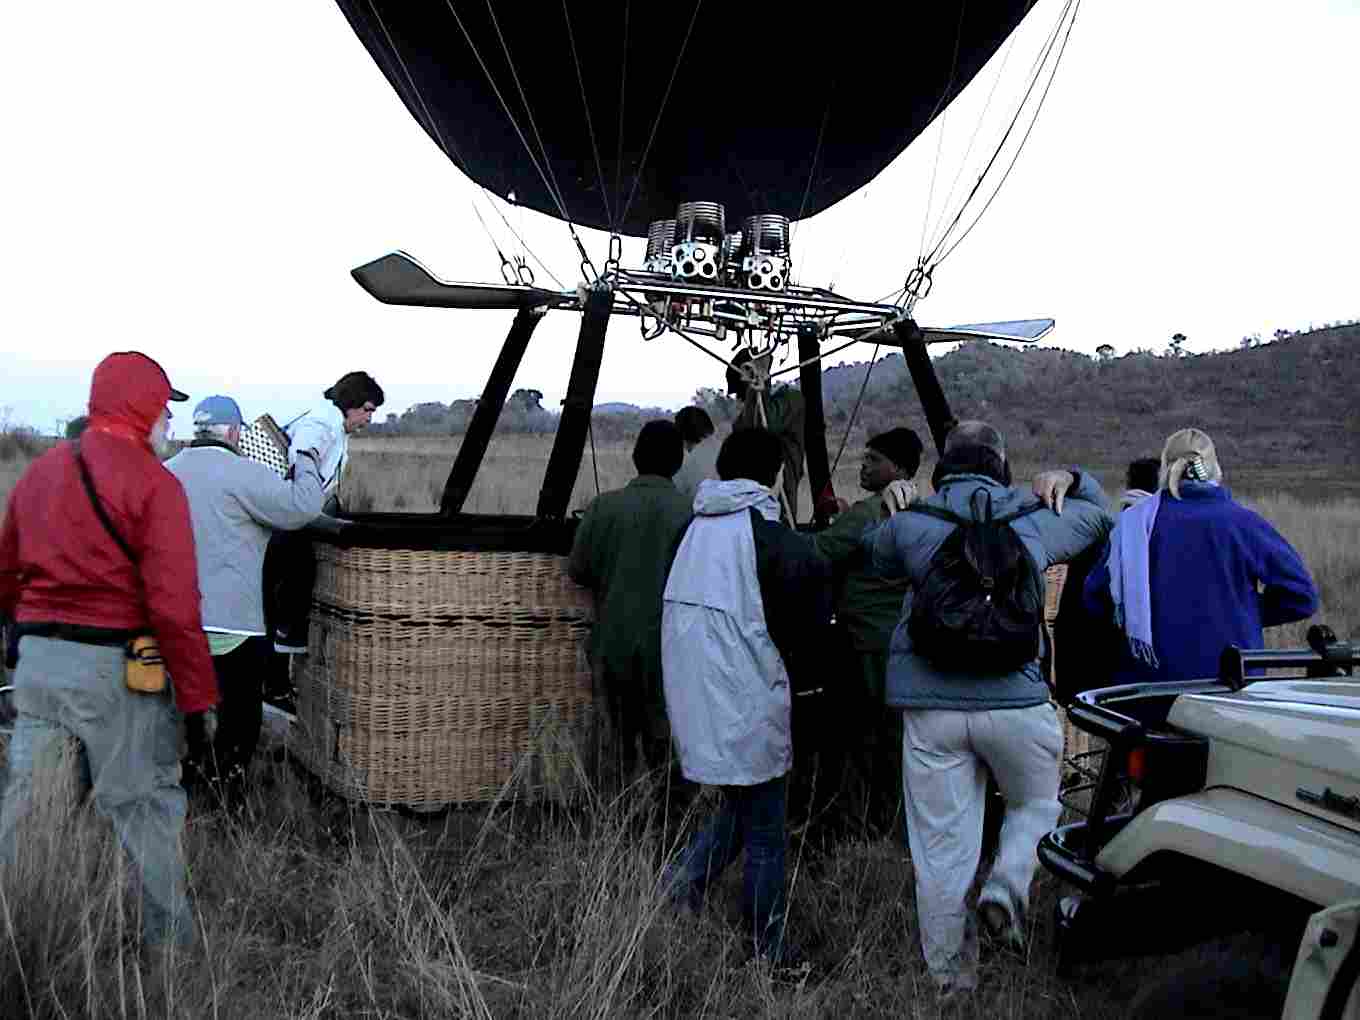 We are about to board the balloon.  Photo by FG.